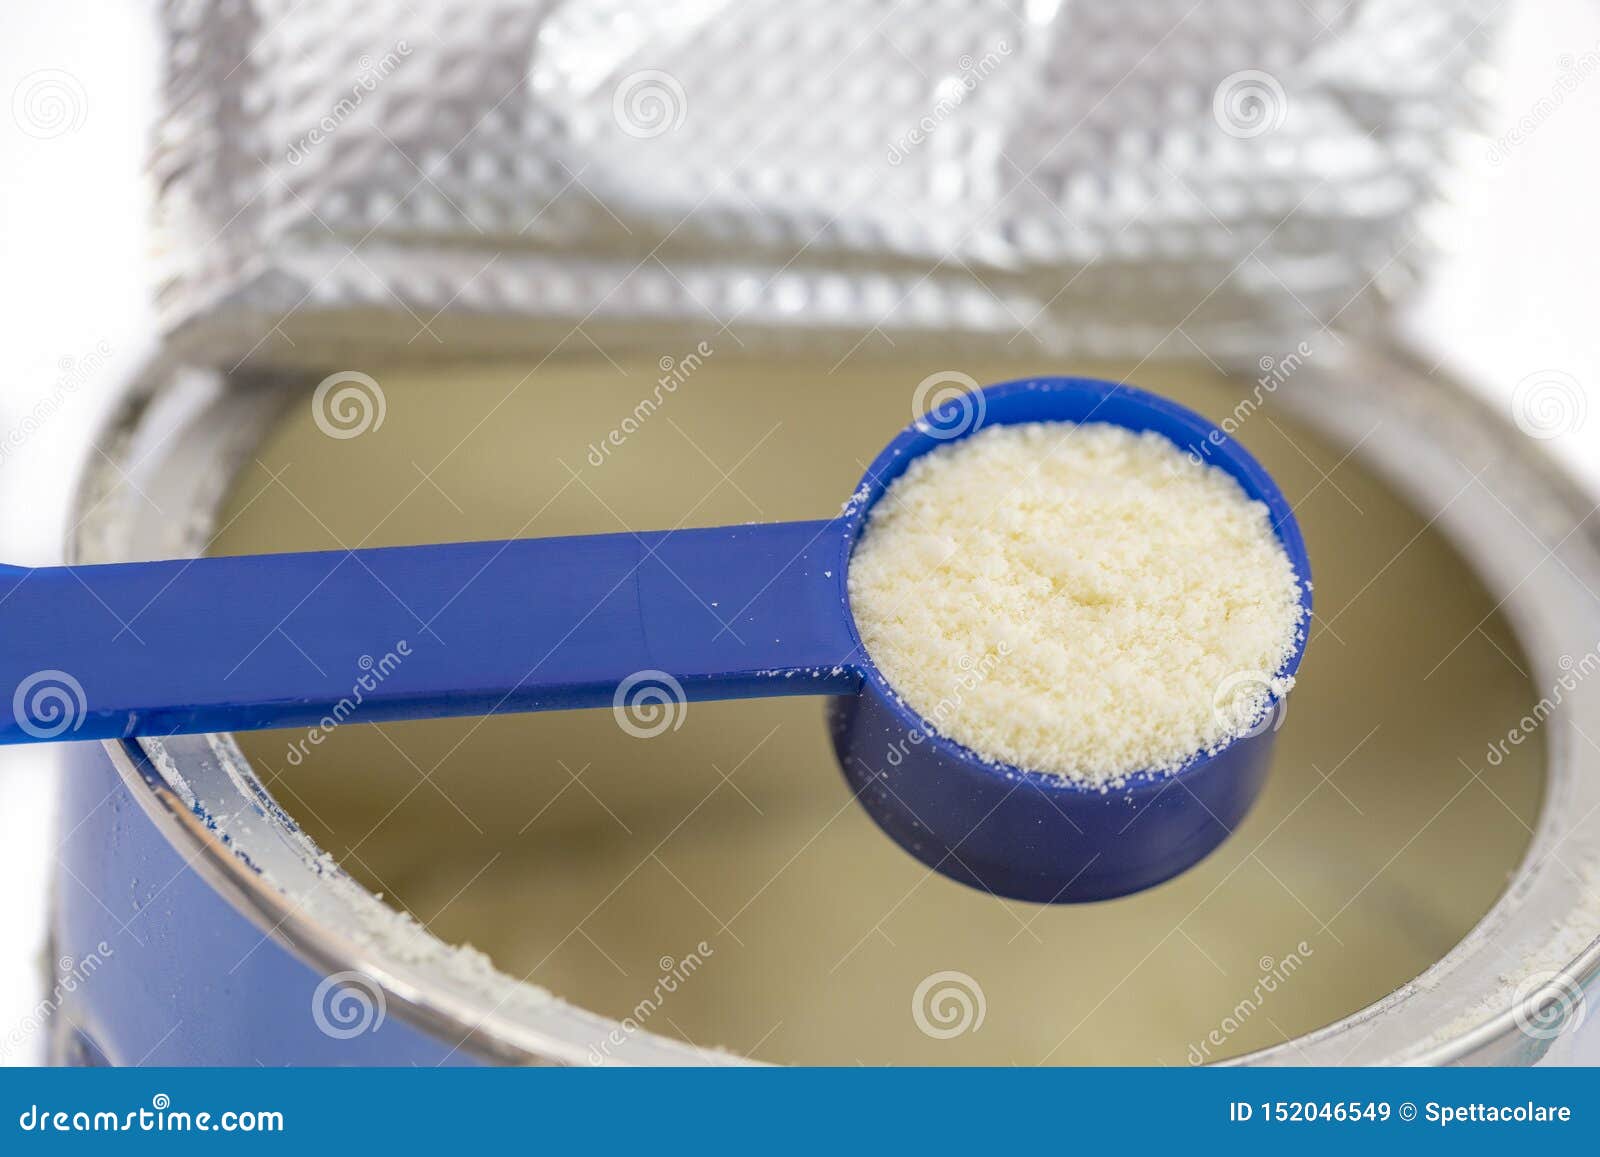 infant formula in spoon and can